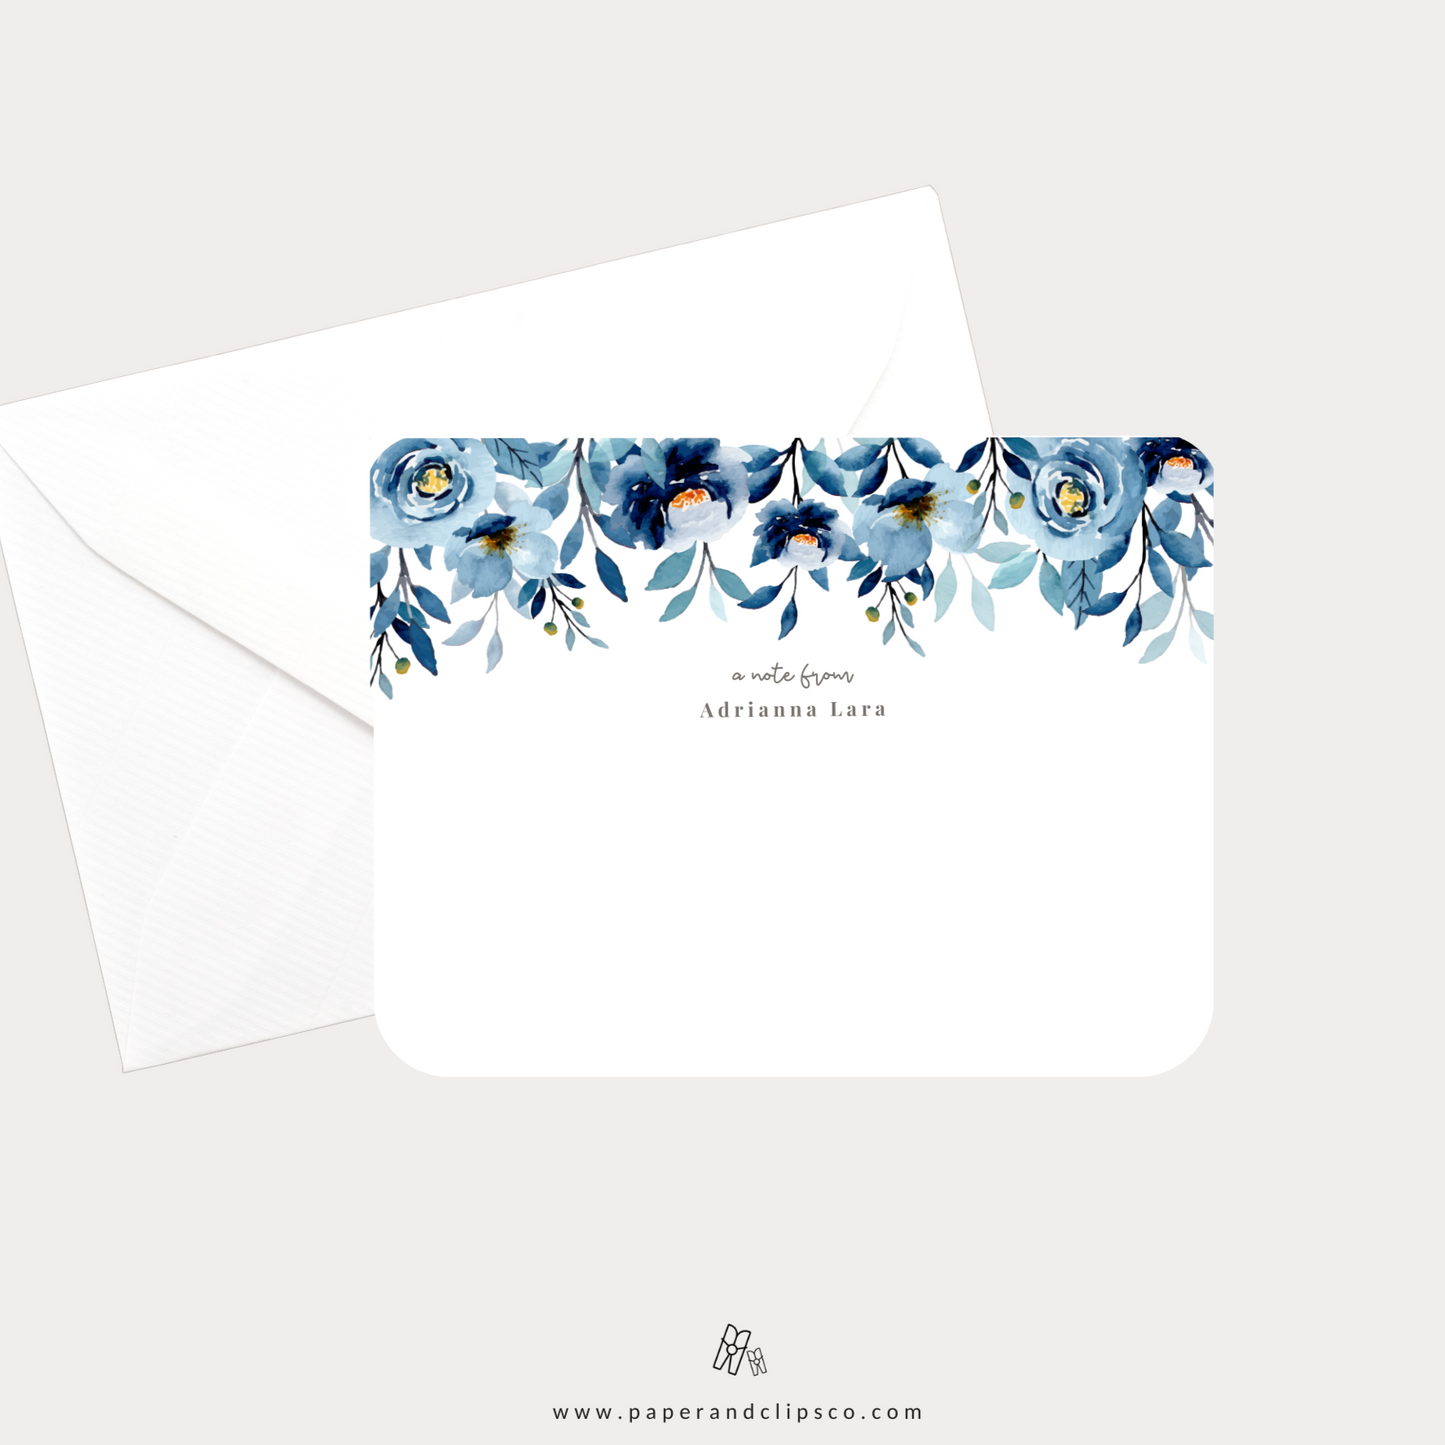 Set of 12 floral note cards with matching white envelopes. Give the gift a teacher, friend, colleague or anyone (really) would love to receive. Personalized note cards set is just the perfect they'd want!